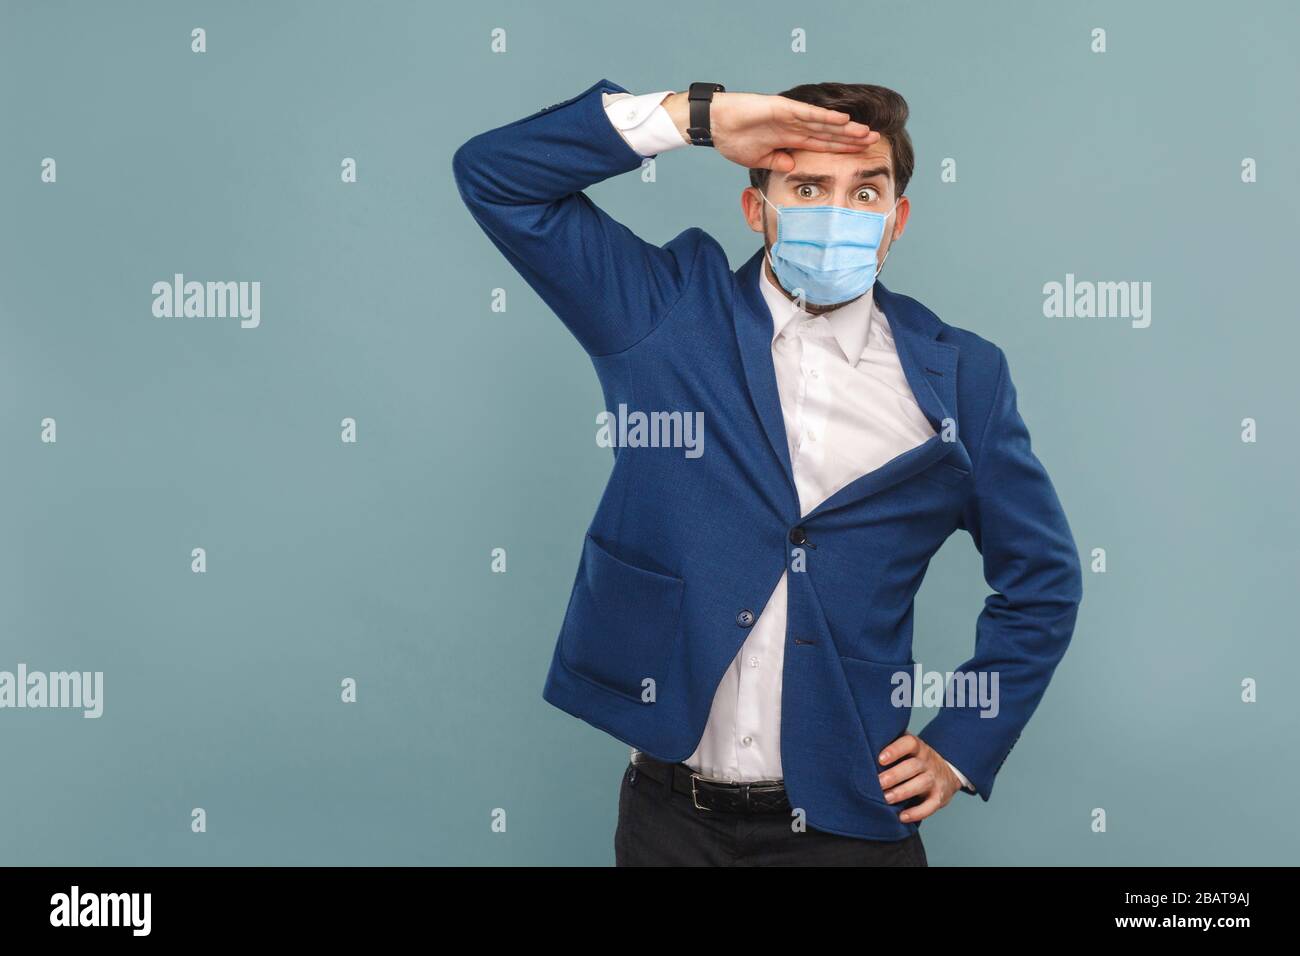 Looking so far with attention. young man with surgical medical mask, serious face looking away. Business people medicine and health care concept. Indo Stock Photo